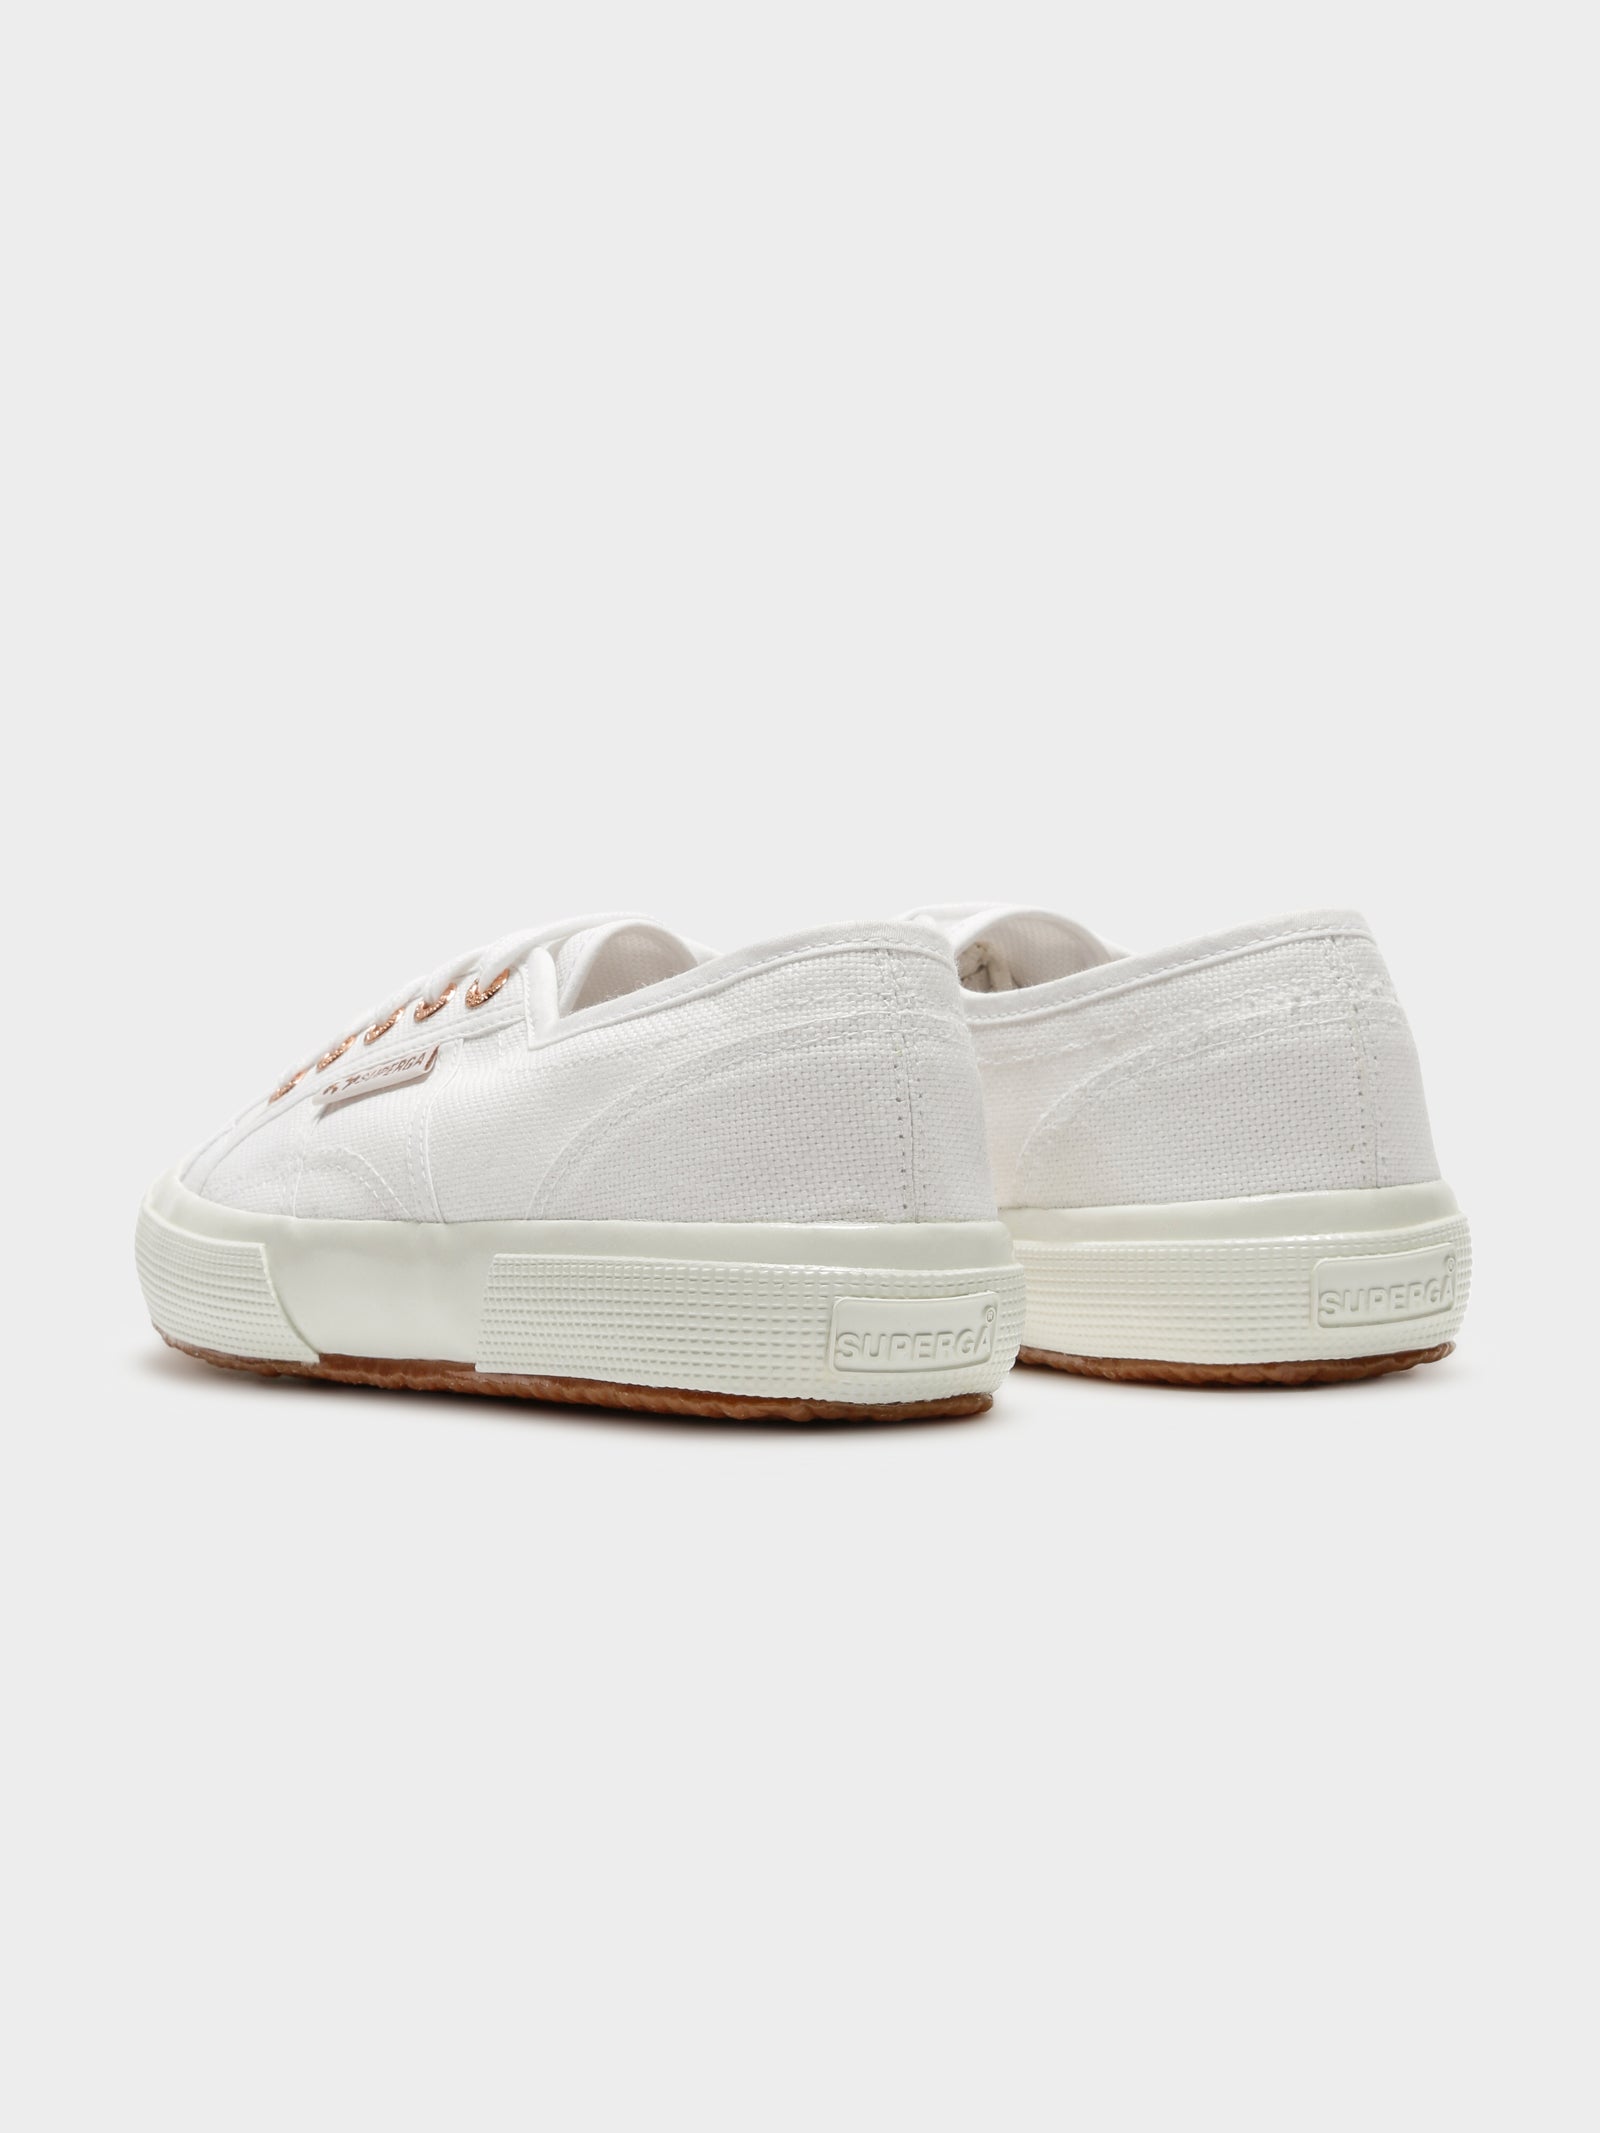 Womens 2750 Canvas Sneakers in Rose Gold - Glue Store